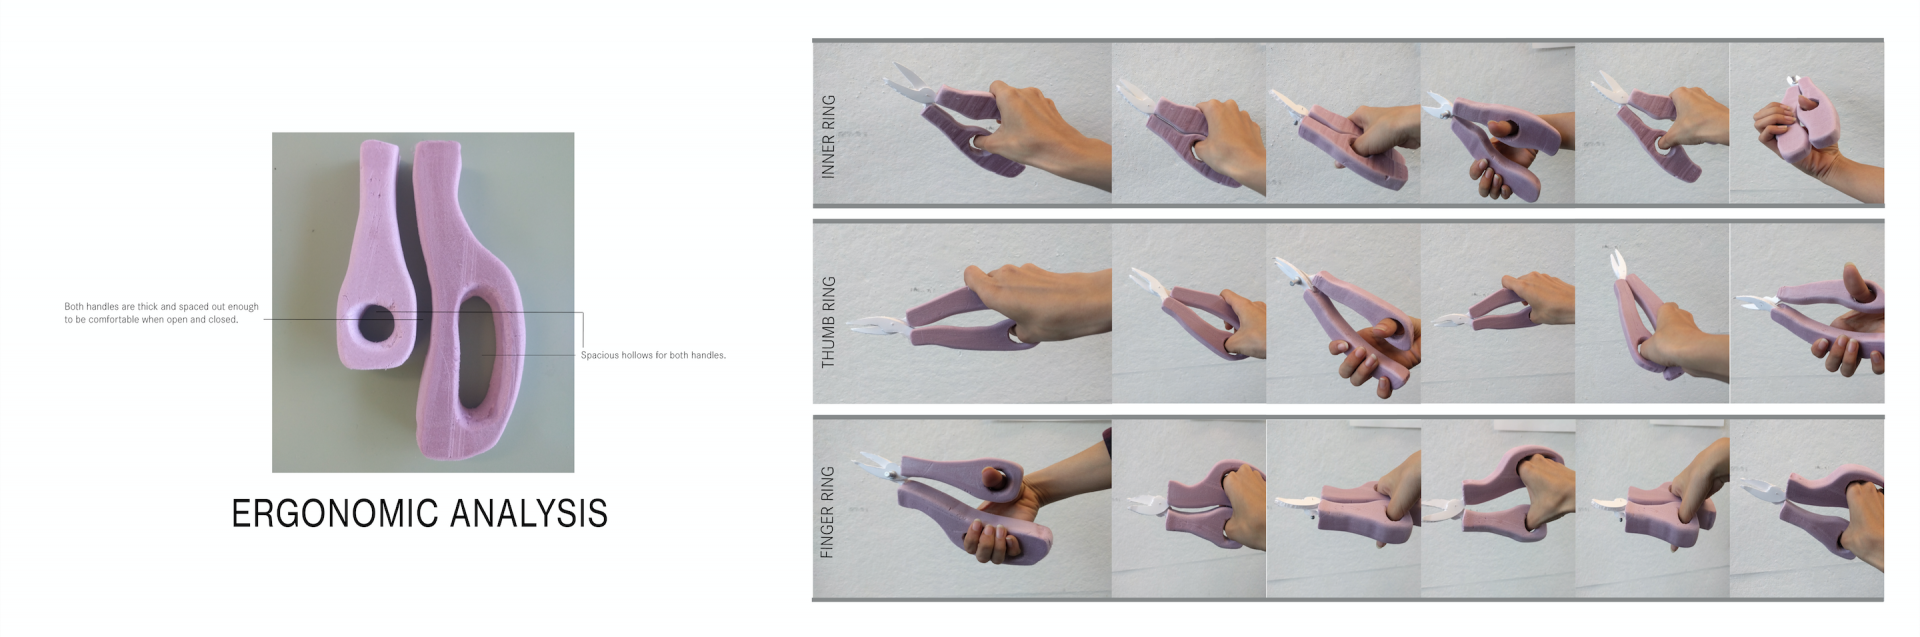 A large grouping of photos showing a hand holding a foam handle in different positions and angles. 